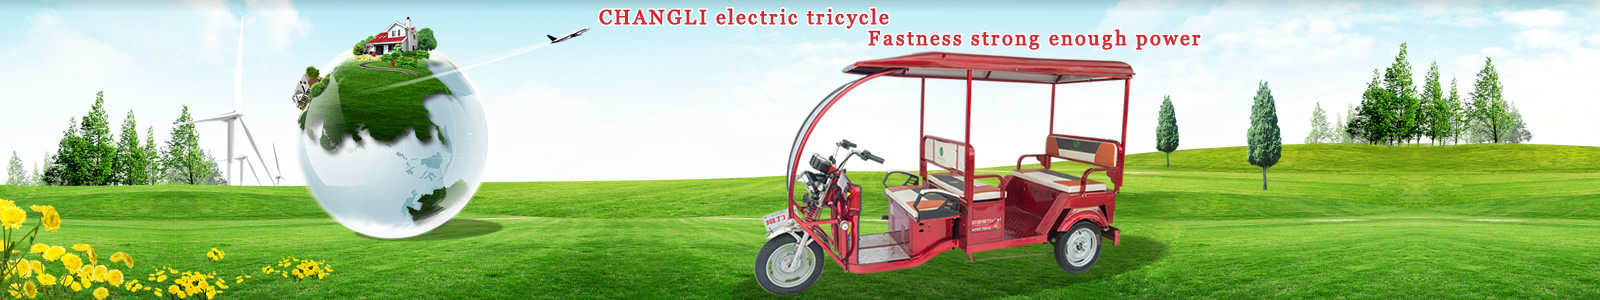 CHANGLI electric tricycle